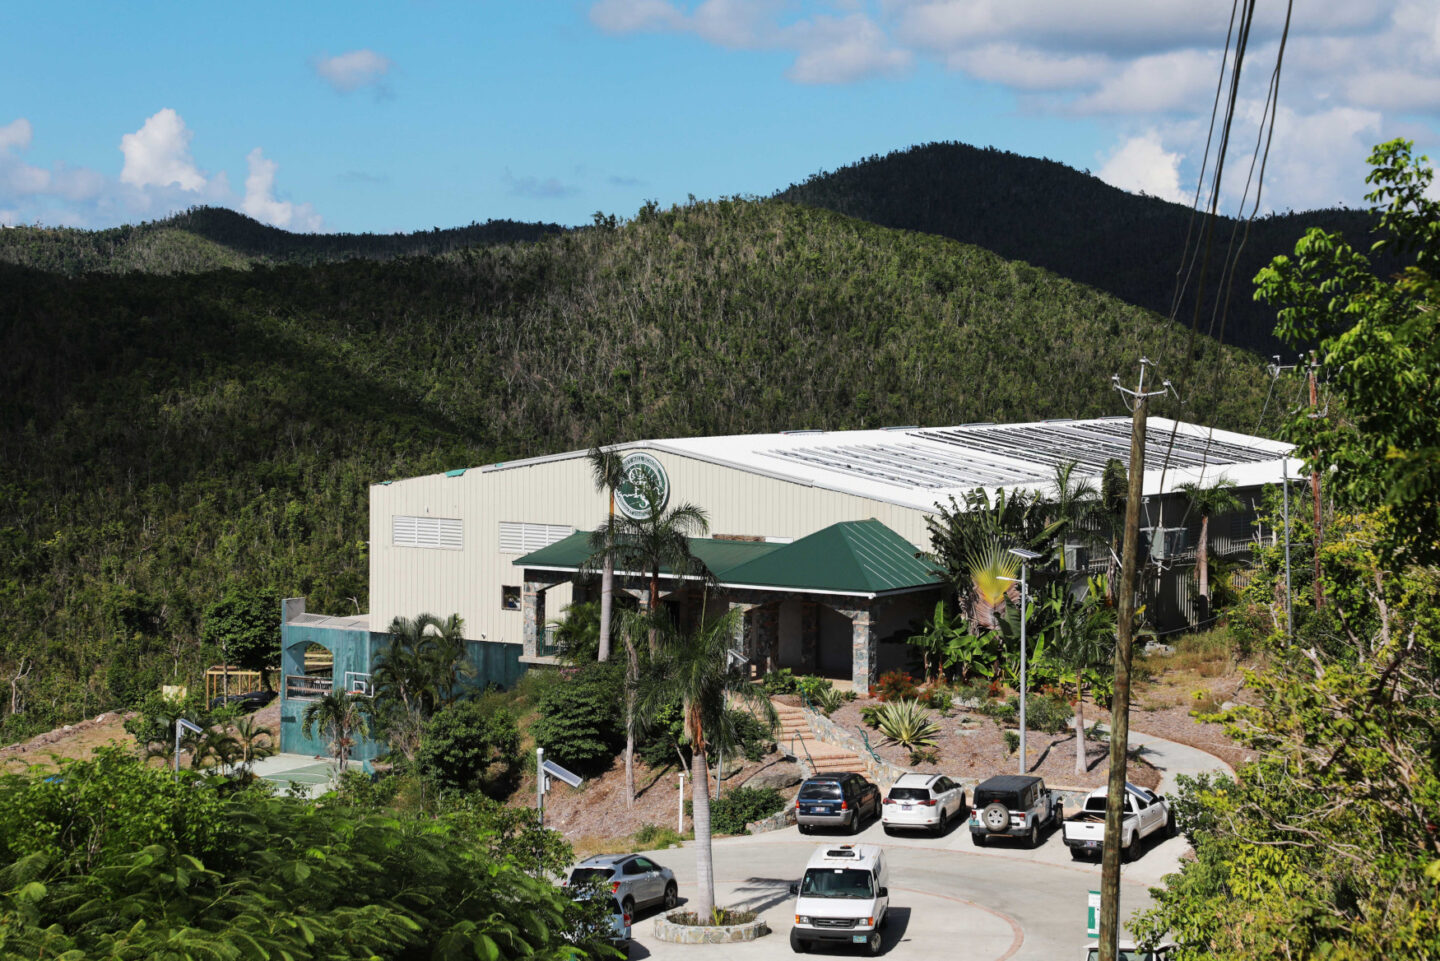 Solar panels on the roof of a school in the U.S. Virgin Islands